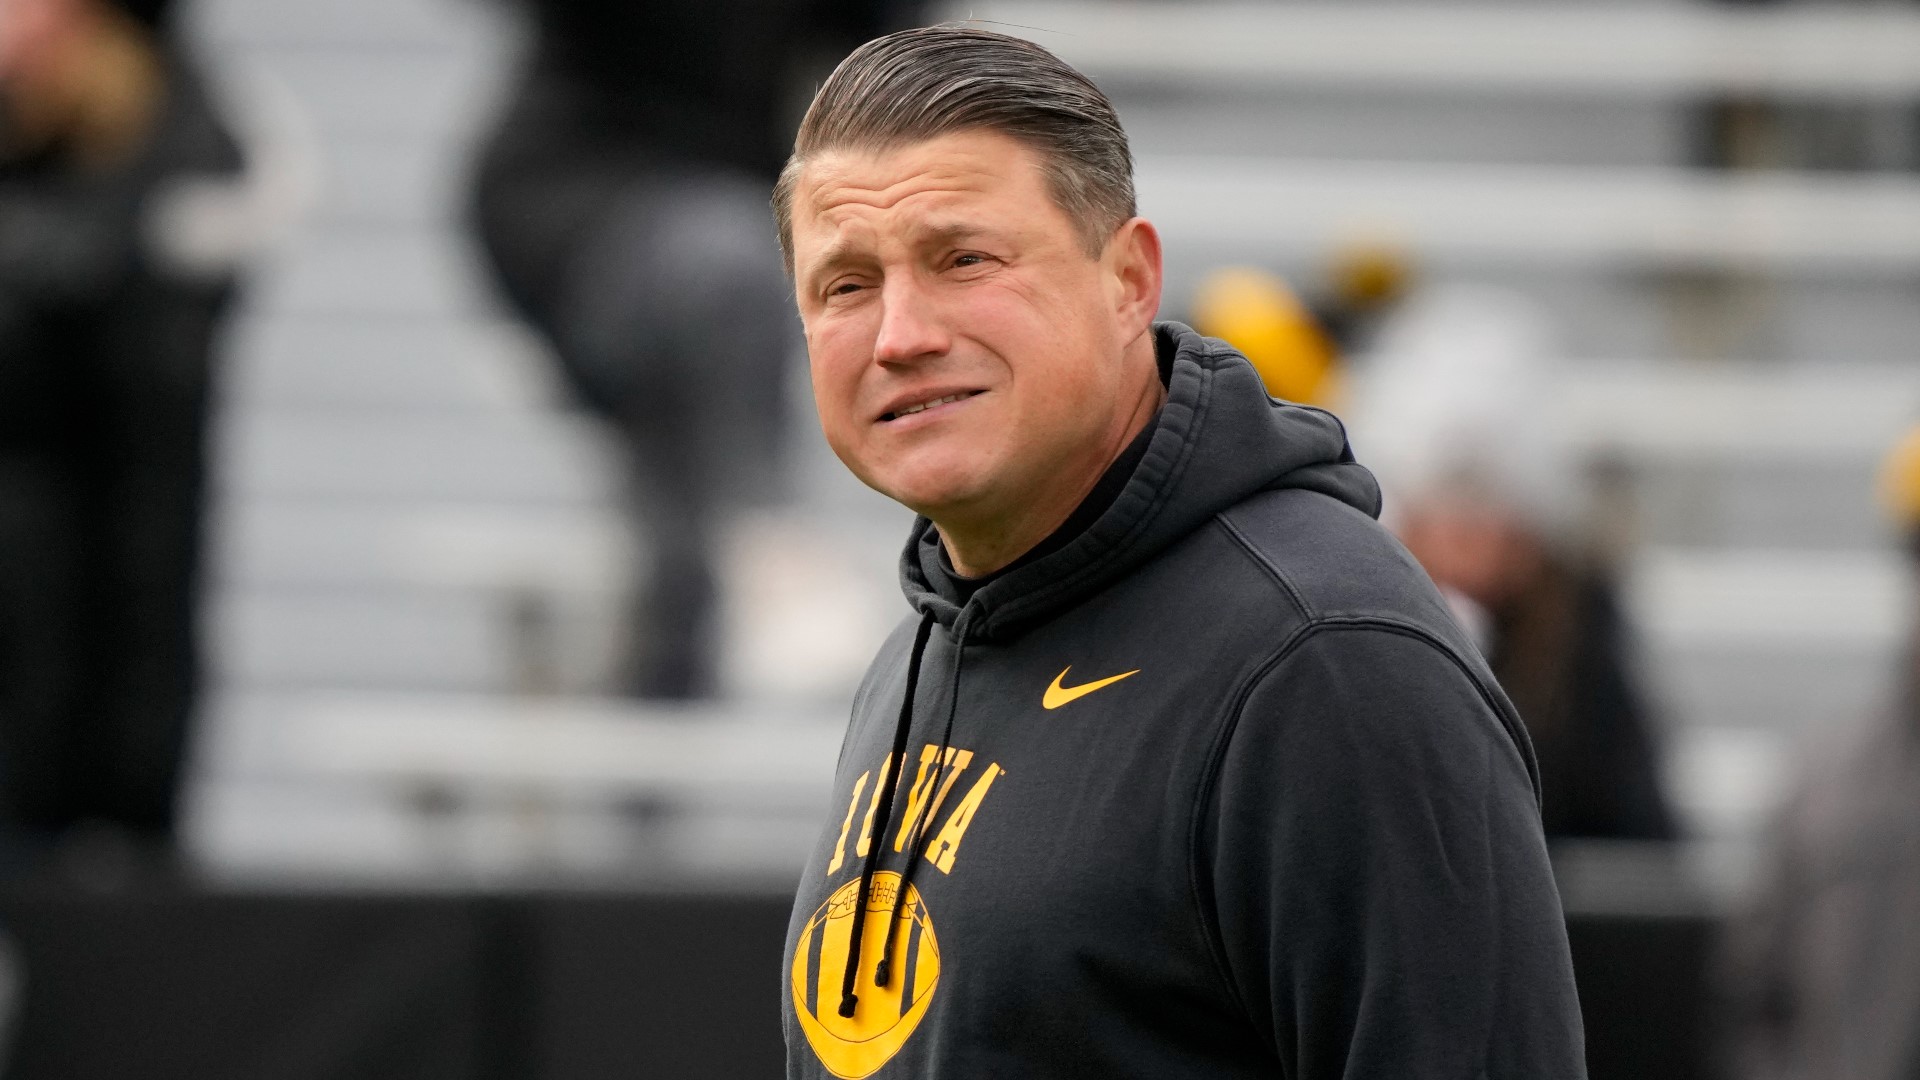 Ferentz's contract states that Iowa must score at least 25 points per game and win seven games or more this season or else he'll be terminated come June 2024.